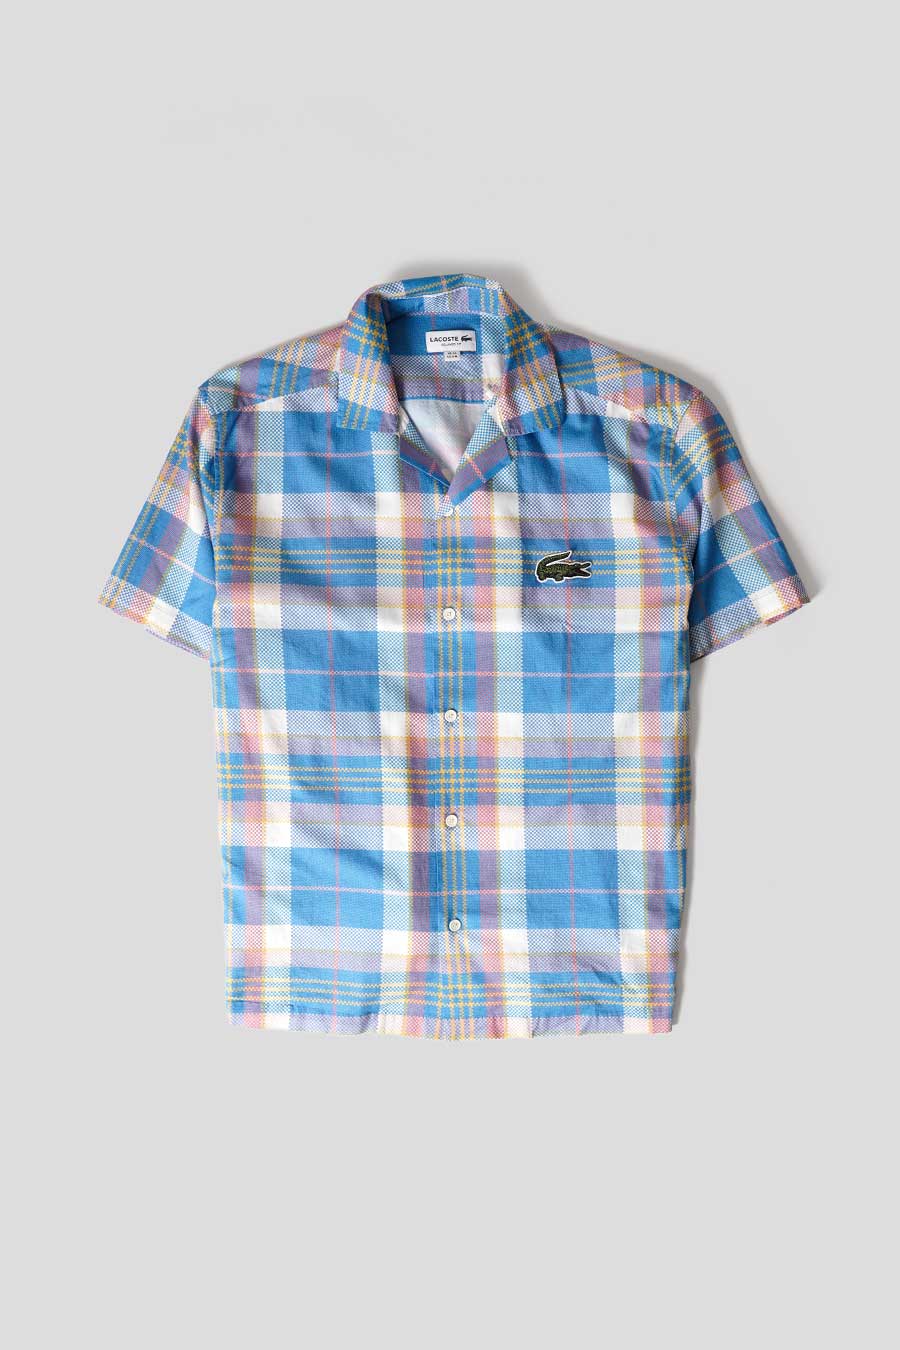 Lacoste - SHORT-SLEEVED BLUE AND WHITE CHECKED SHIRT - LE LABO STORE